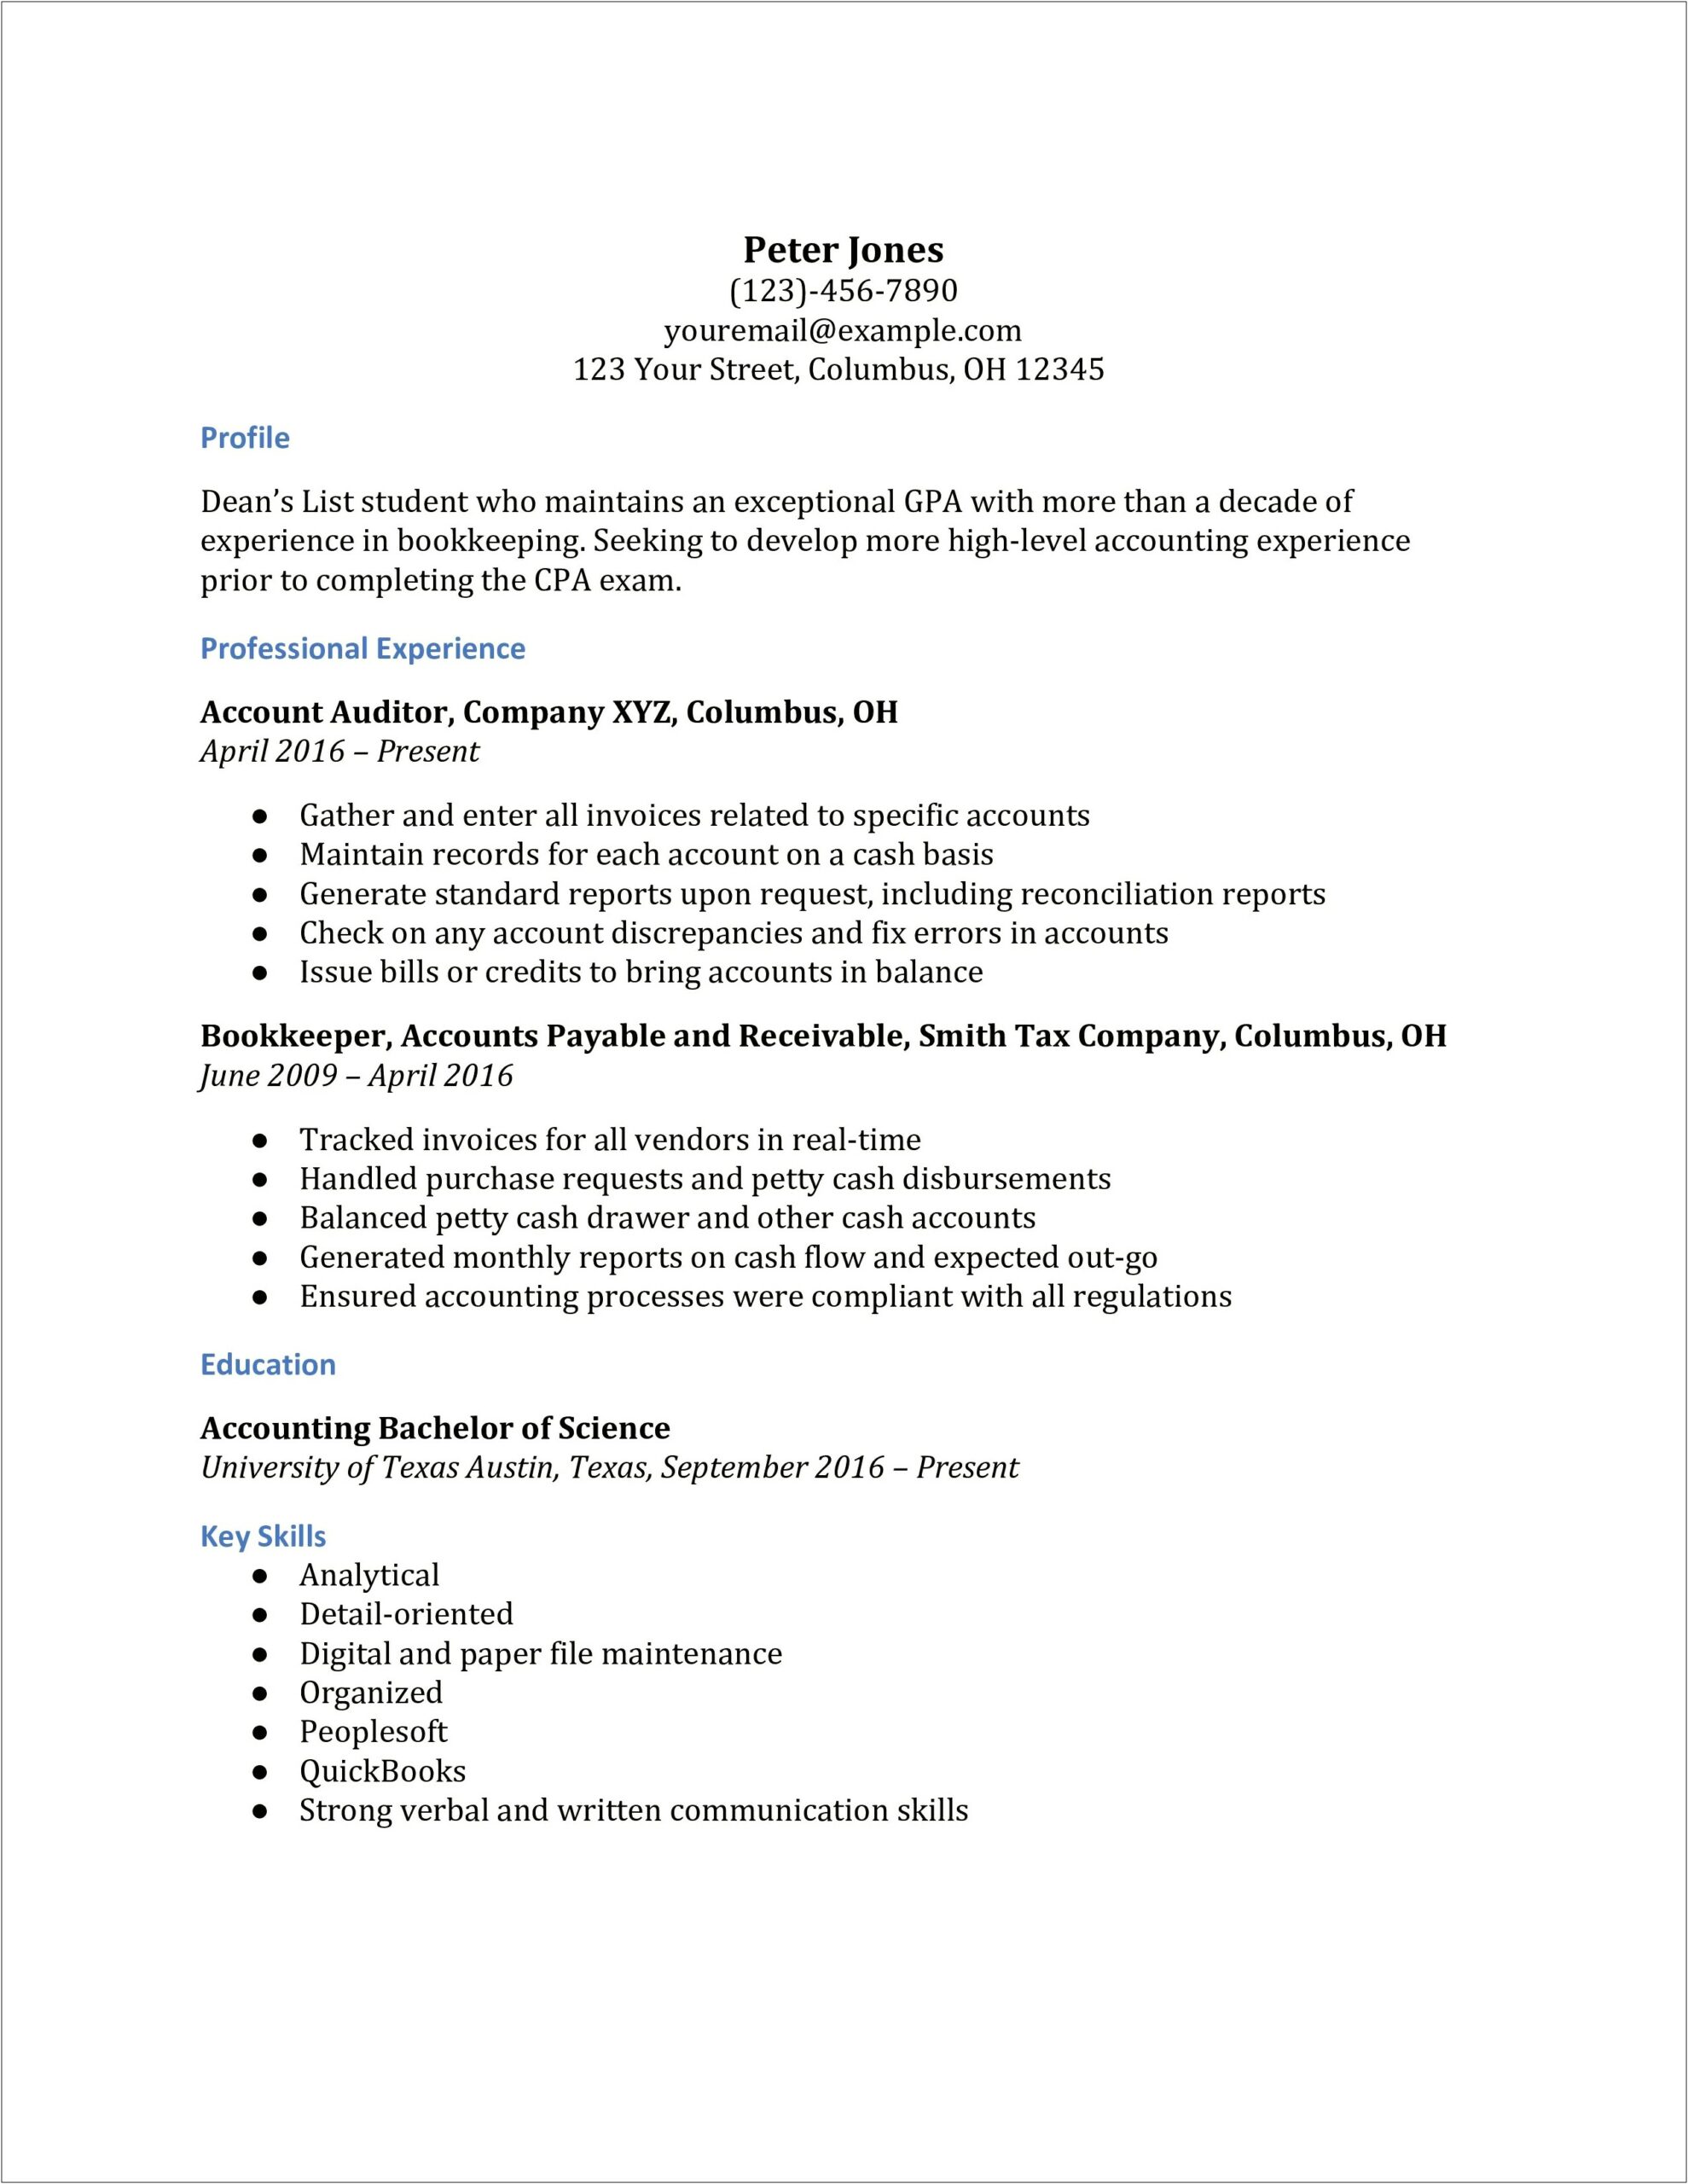 Example Of A College Student's Resume